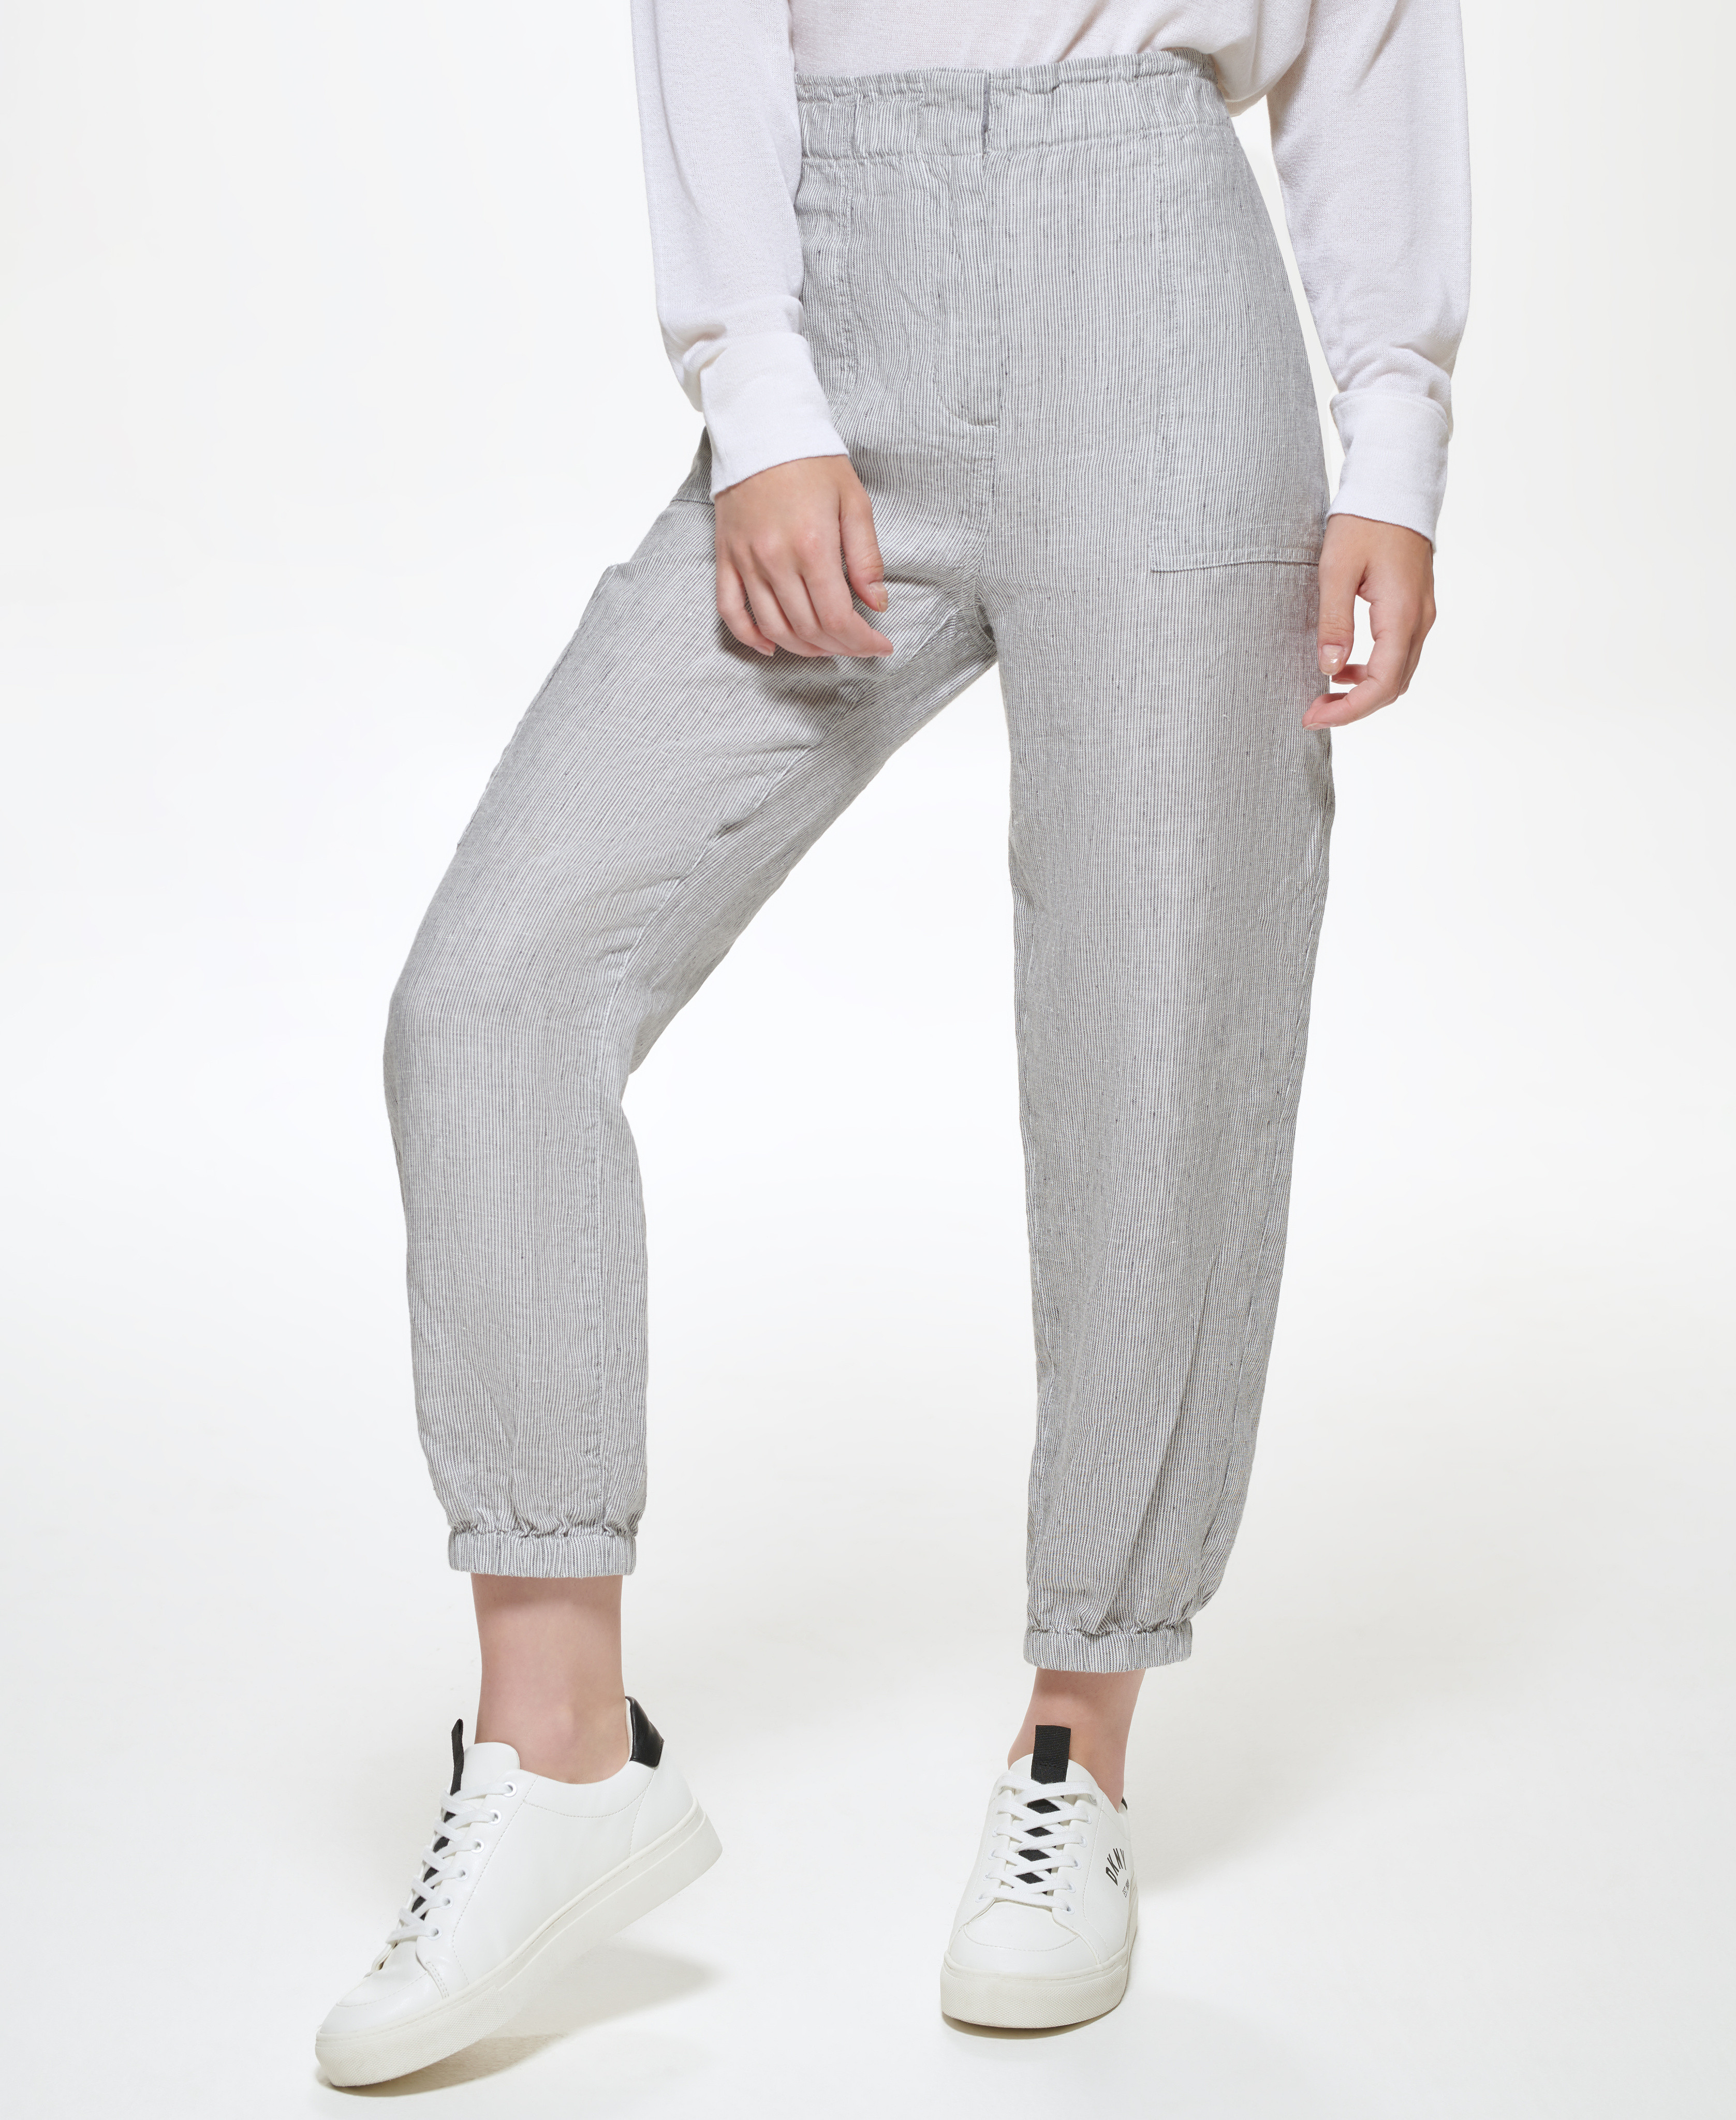 Pantalone jogger a righe, Grigio, large image number 4